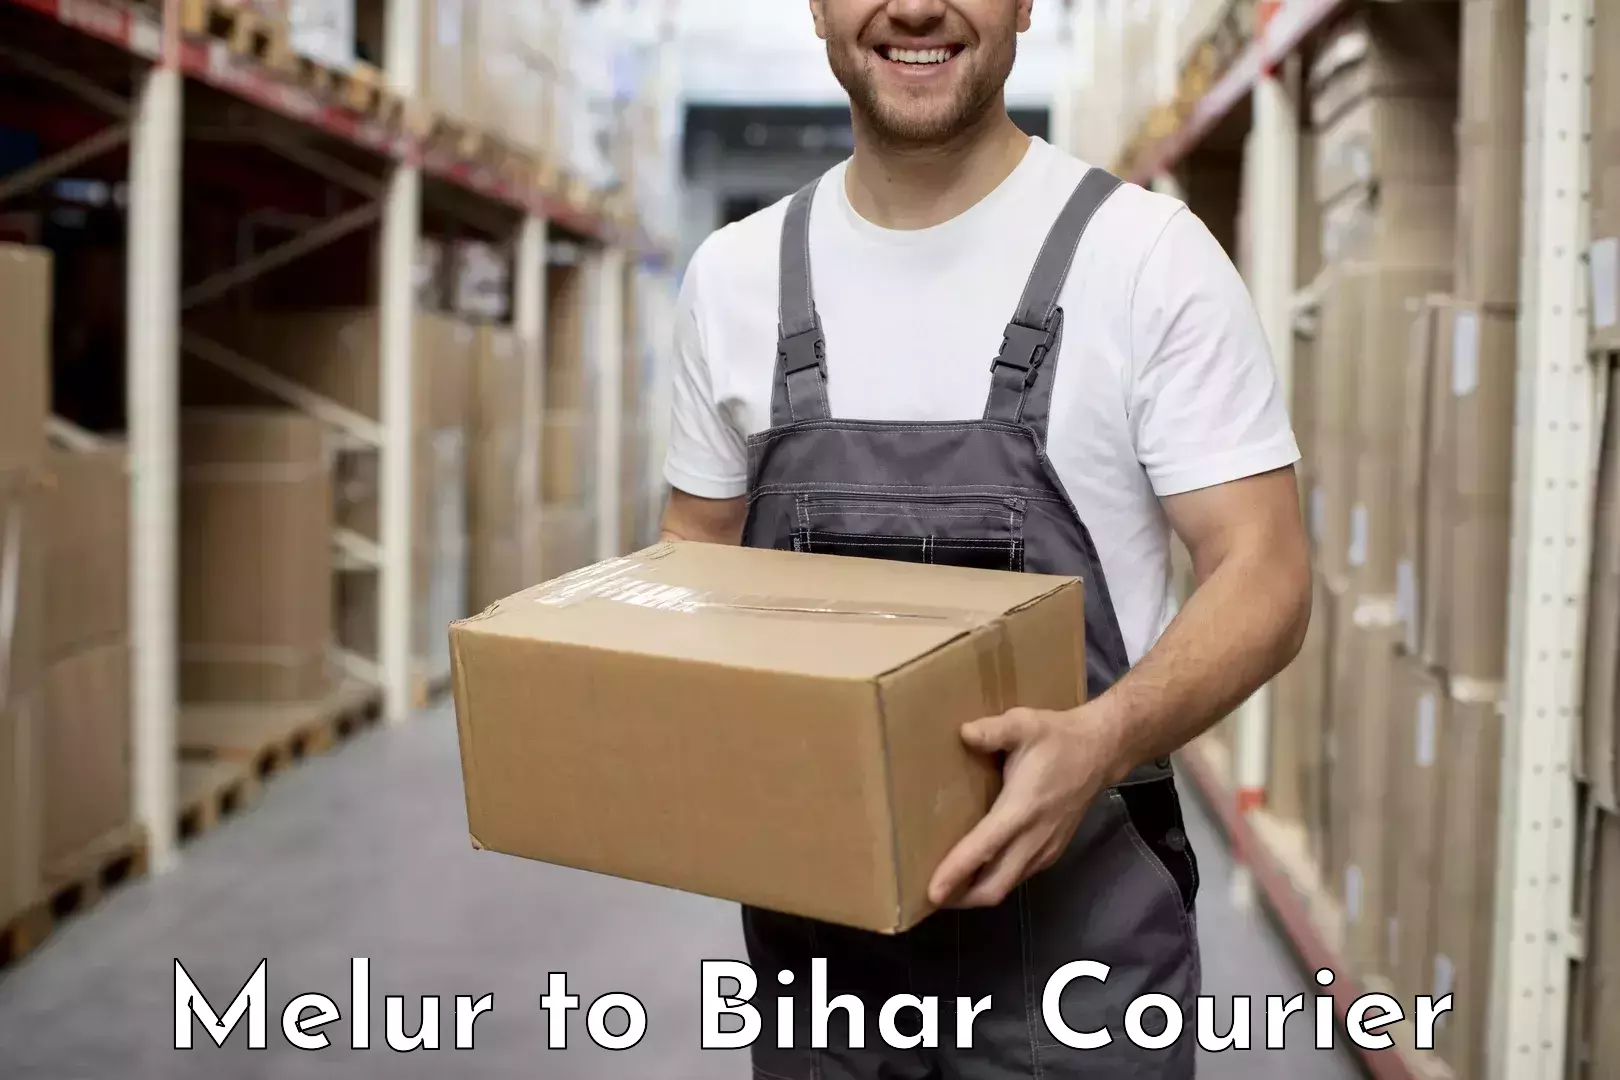 Courier service partnerships Melur to Ghanshyampur